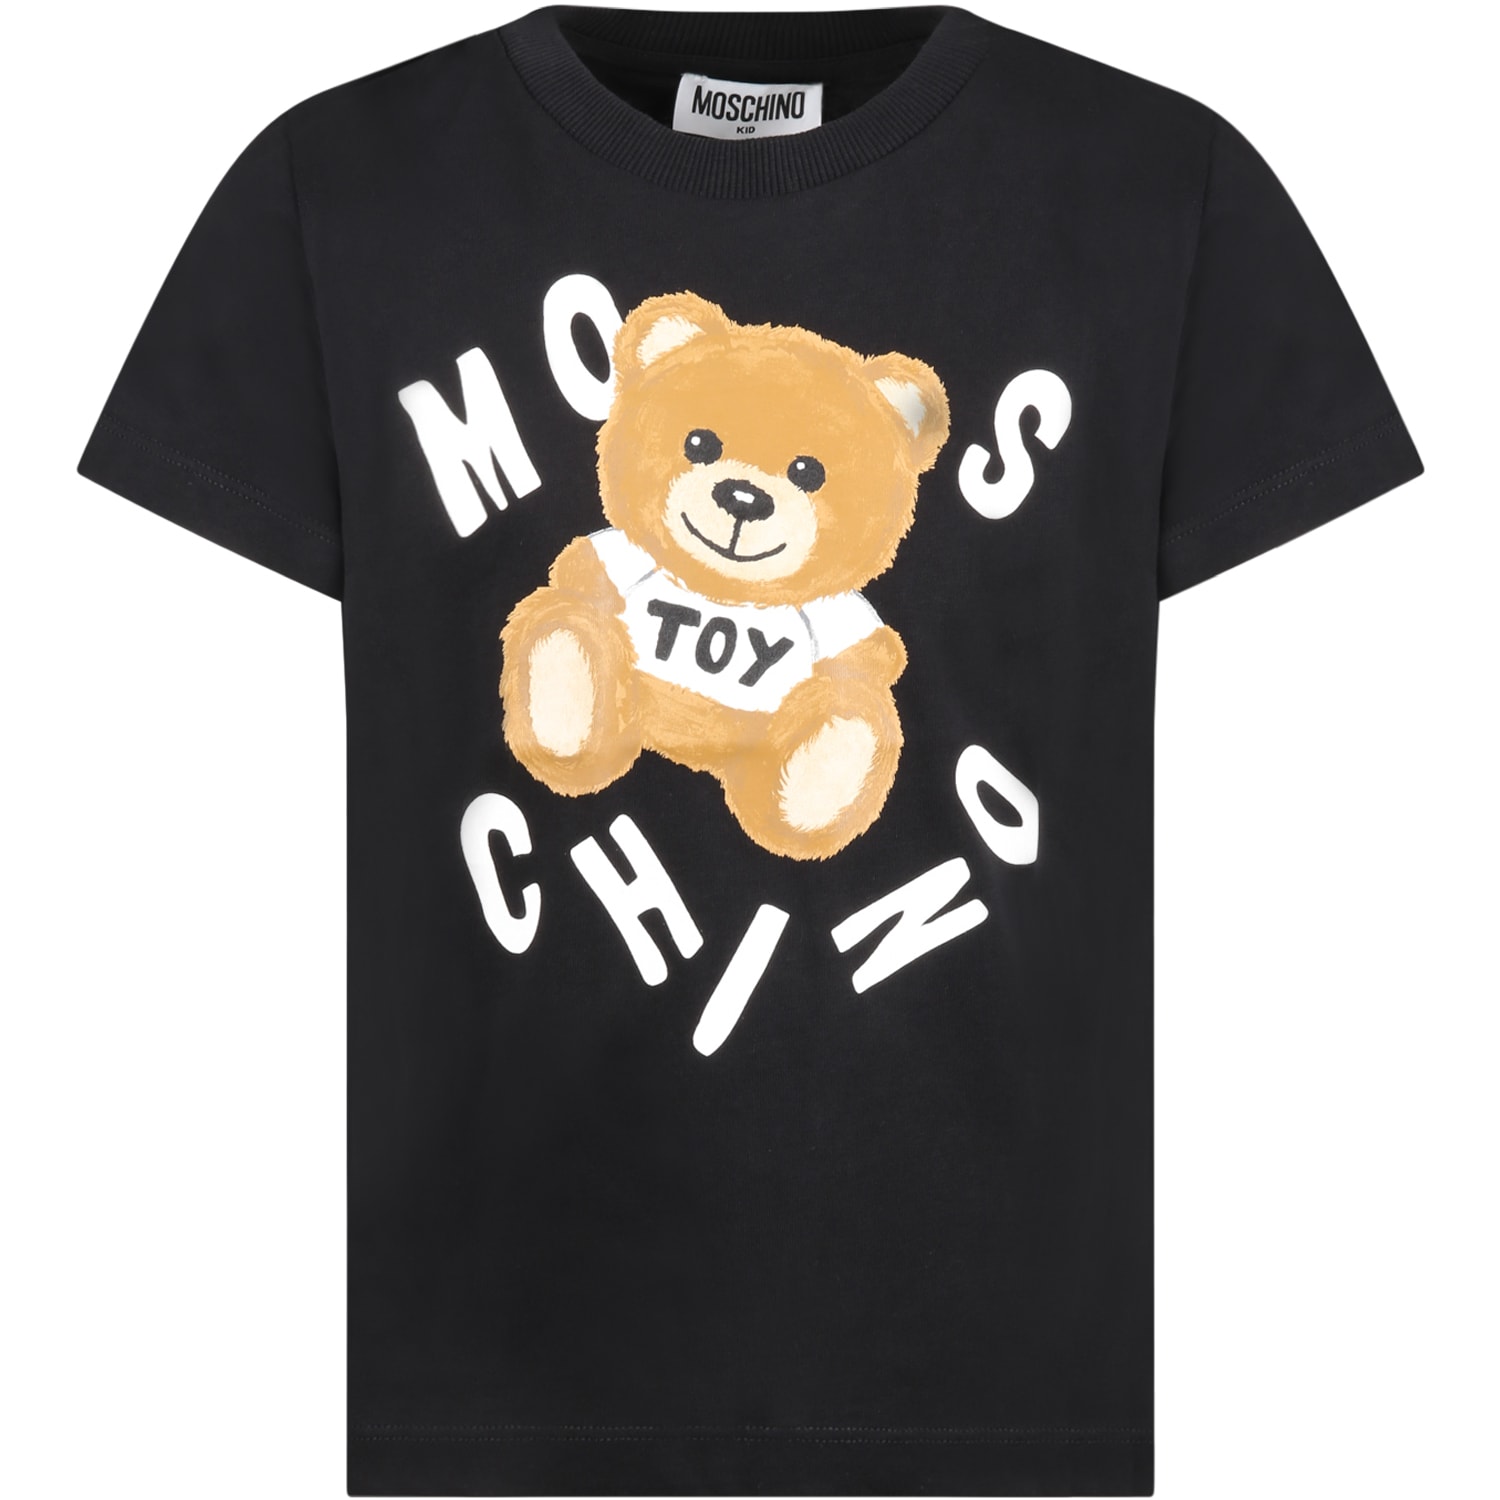 MOSCHINO BLACK T-SHIRT FOR KIDS WITH TEDDY BEAR